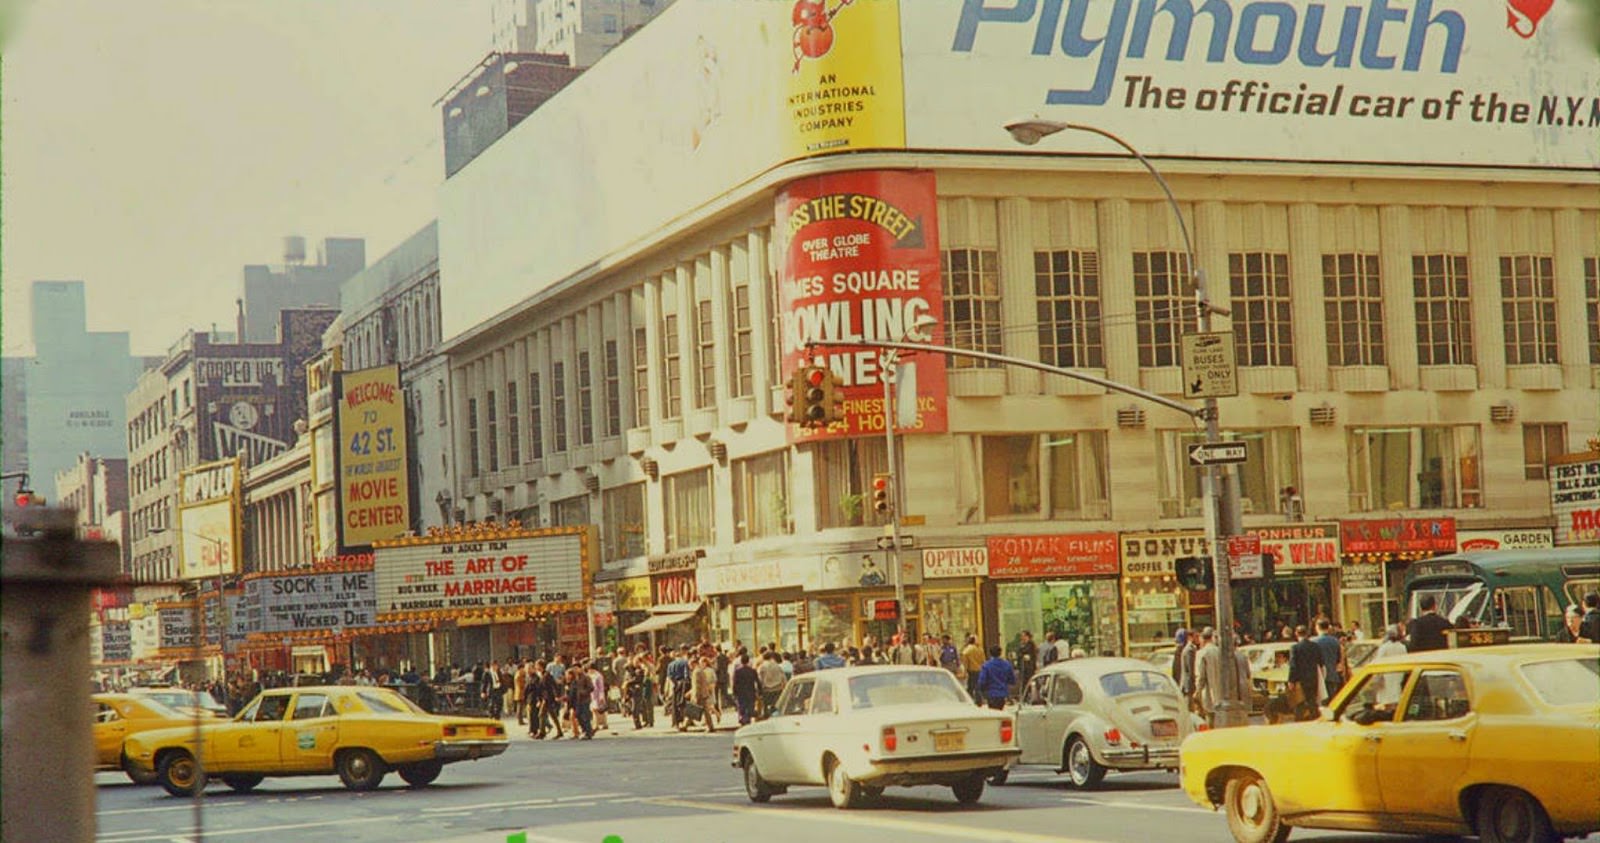 42nd Street at Seventh Avenue, facing Northwest, 1970